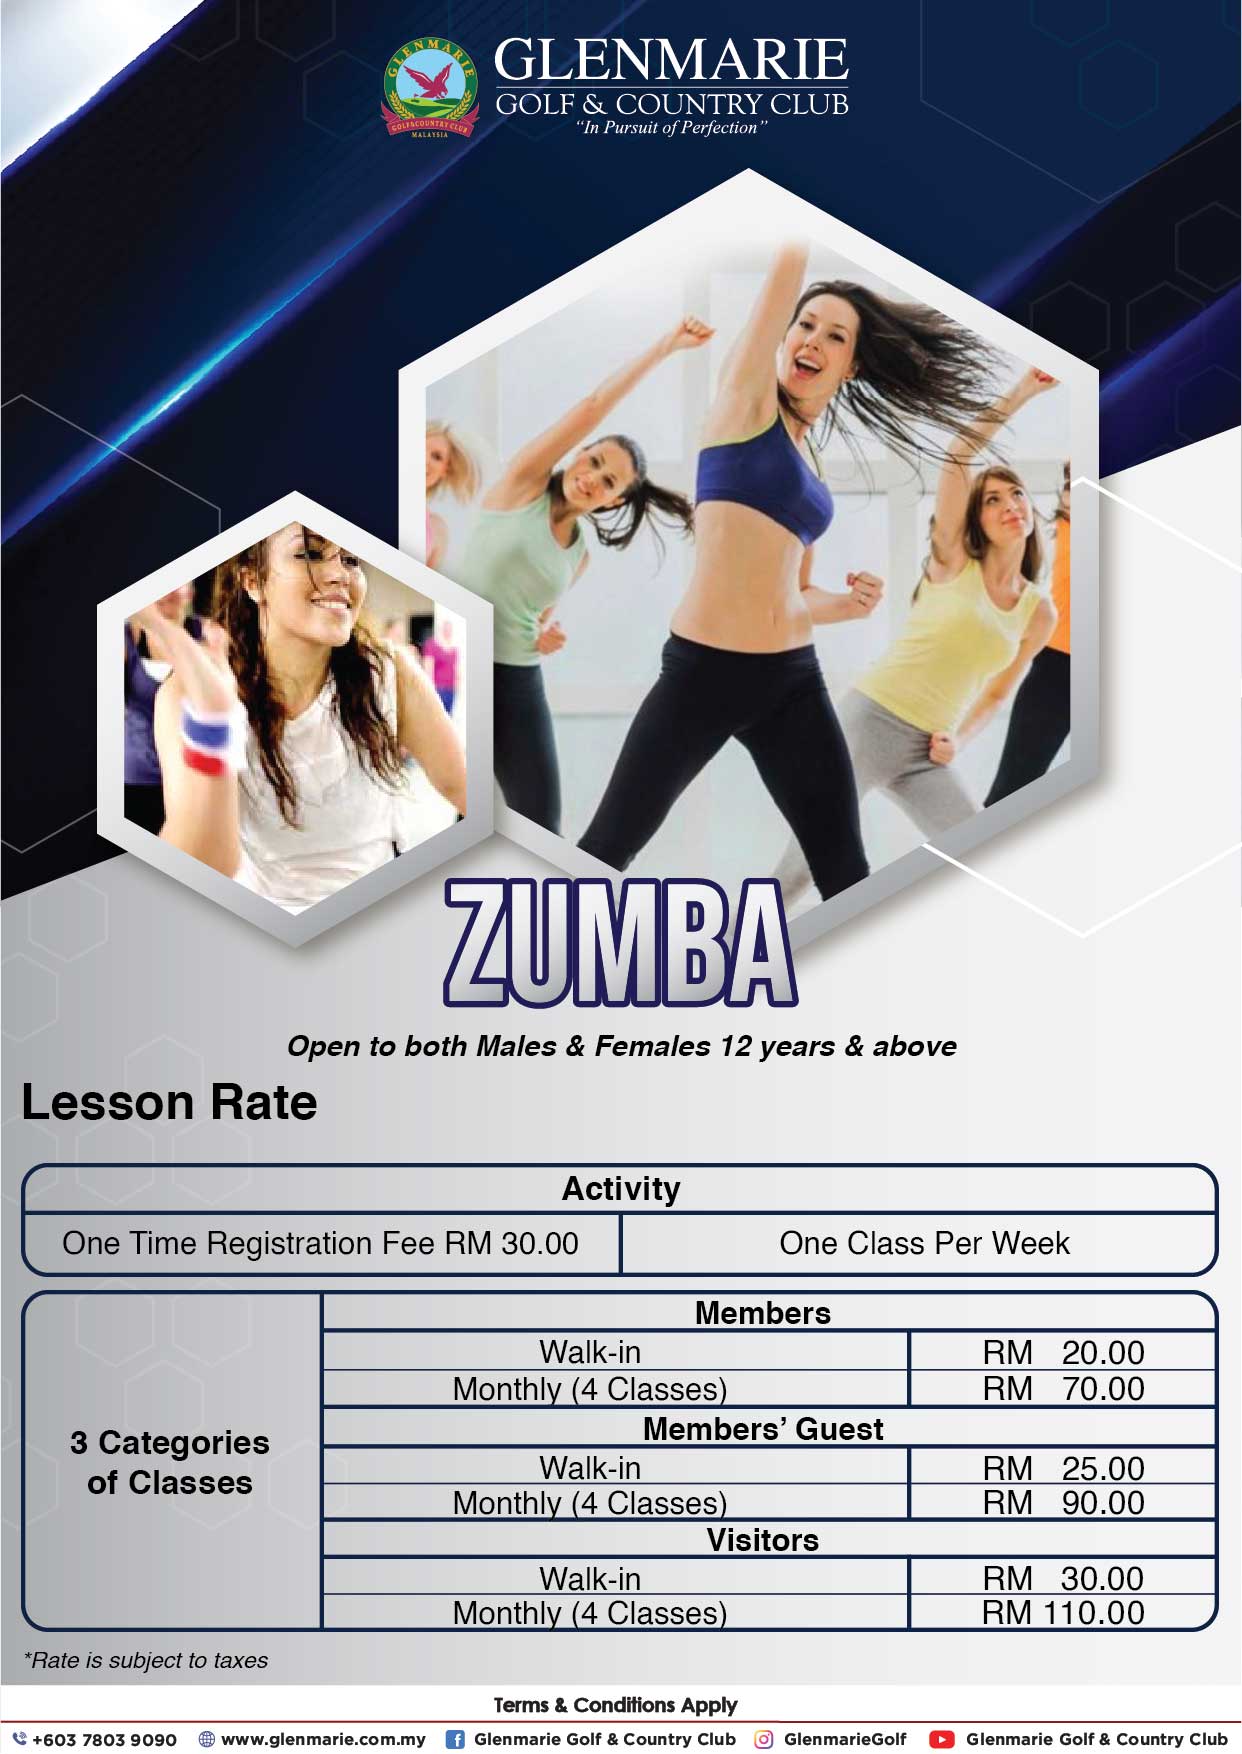 Discover Zumba lessons offered at Glenmarie